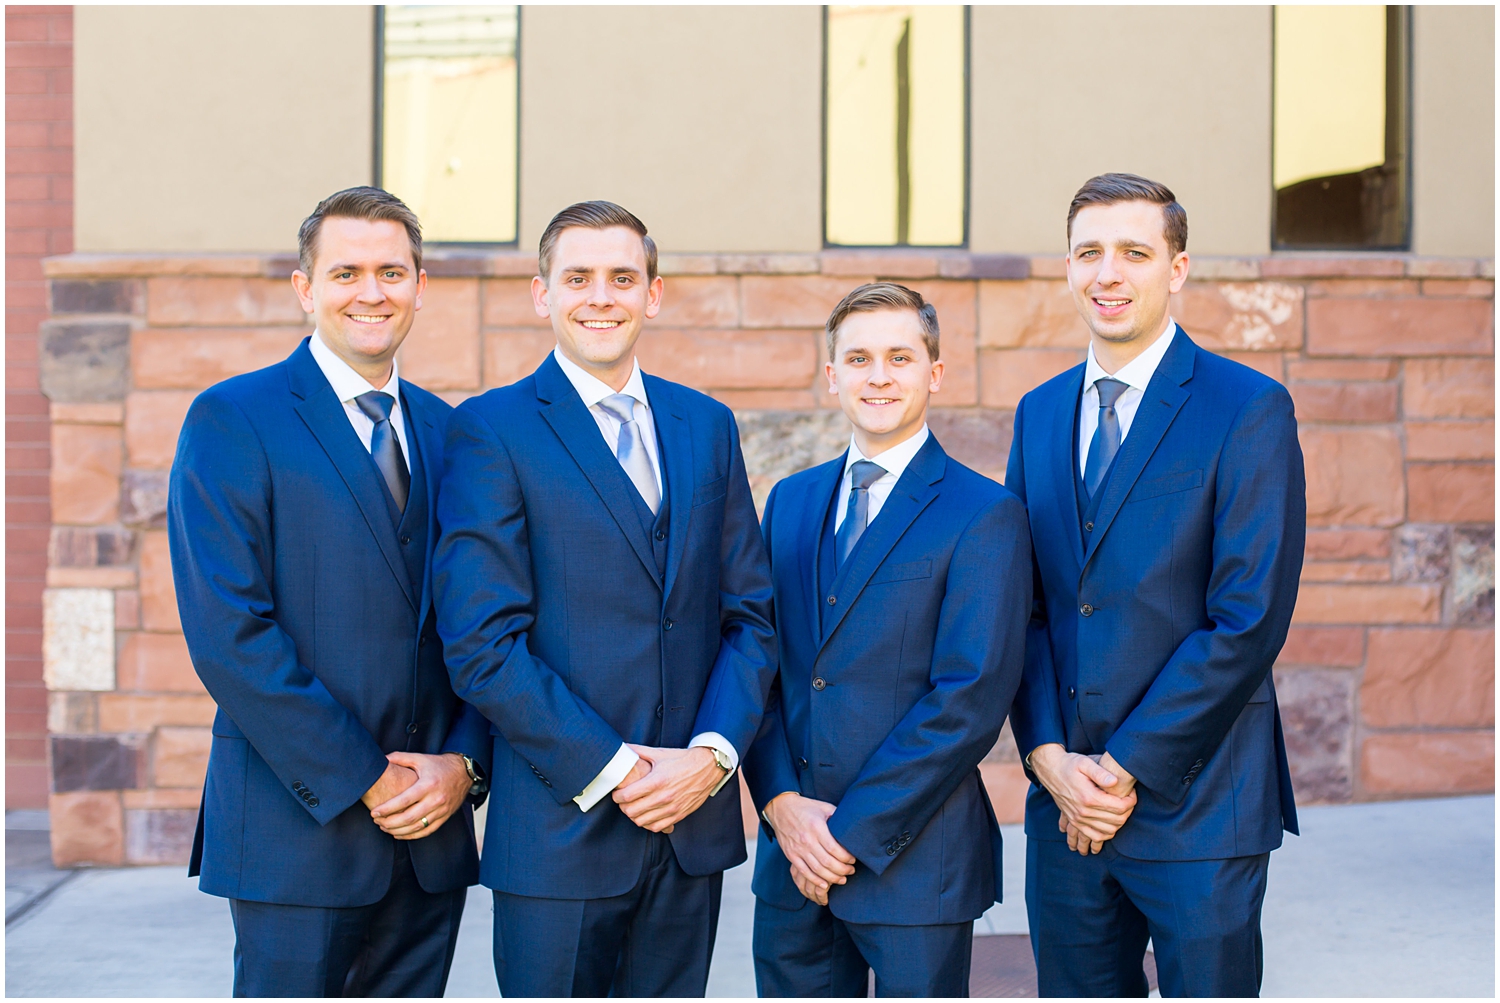 groom and groomsmen in navy blue suit with light blue tie getting ready on wedding day